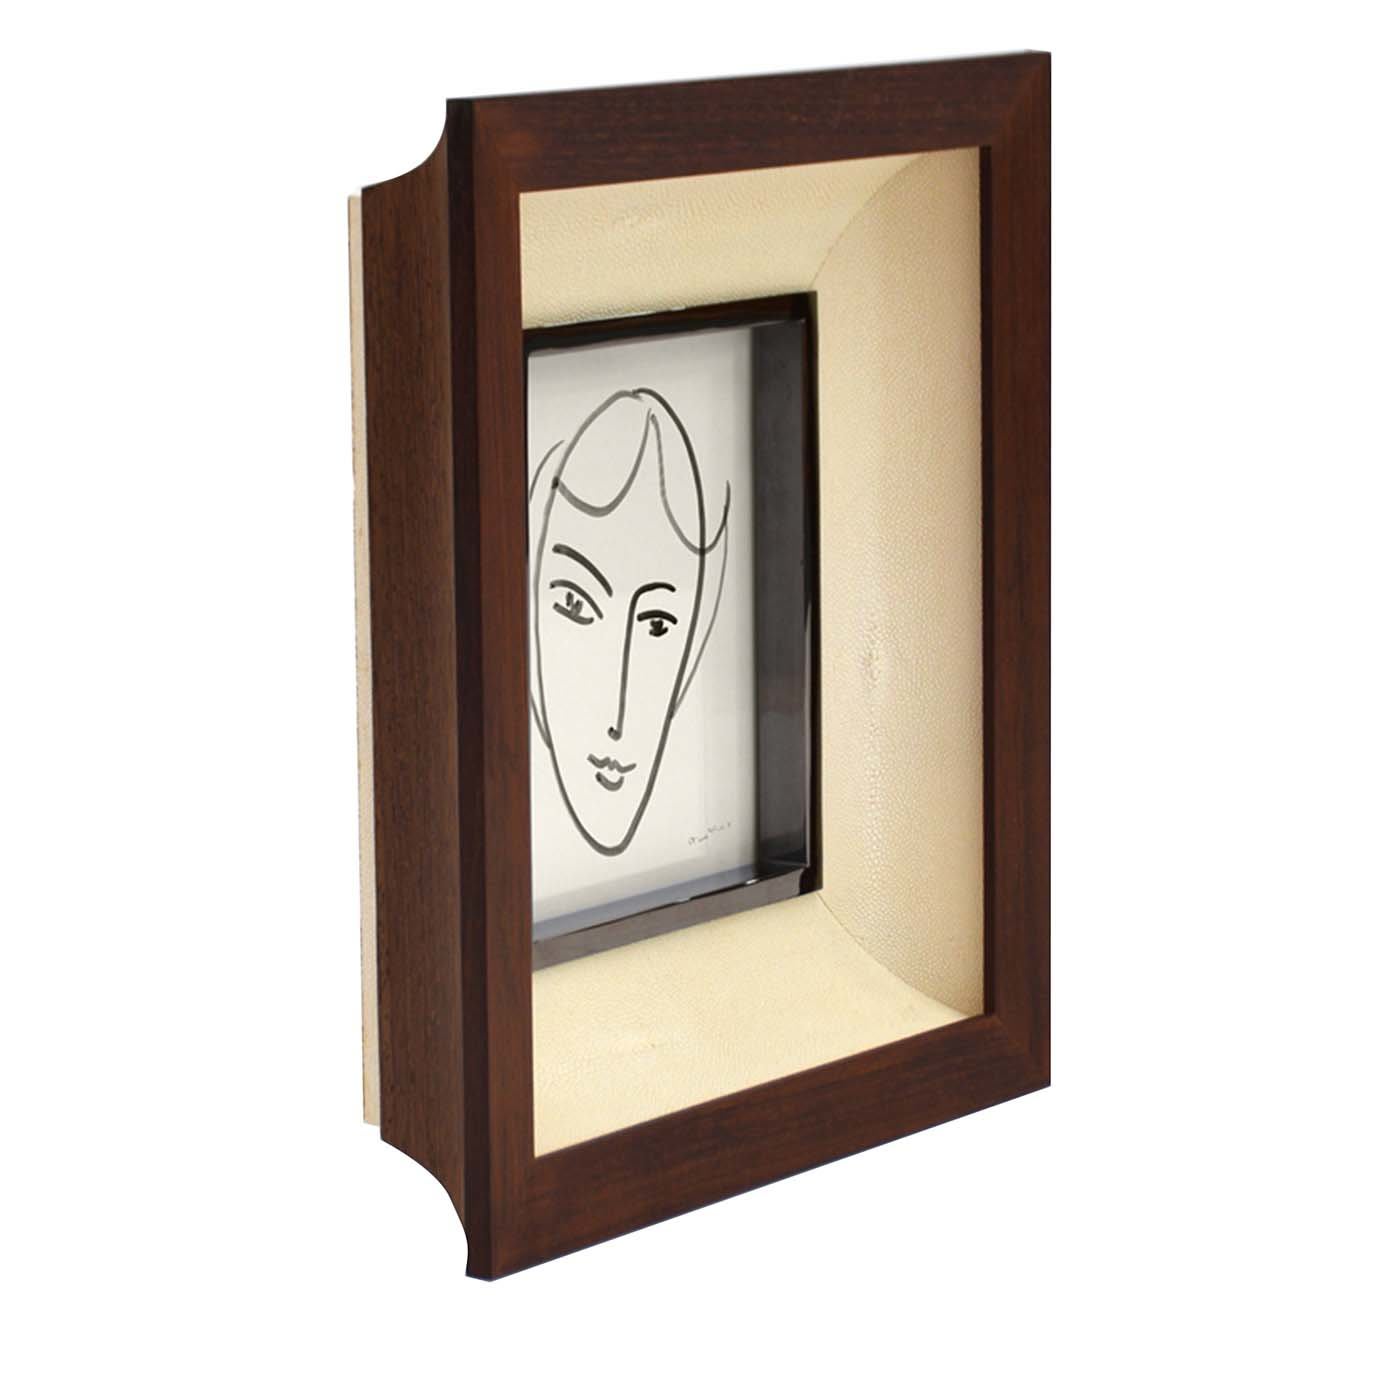 Giotto Wall Picture Frame - Giordano Viganò